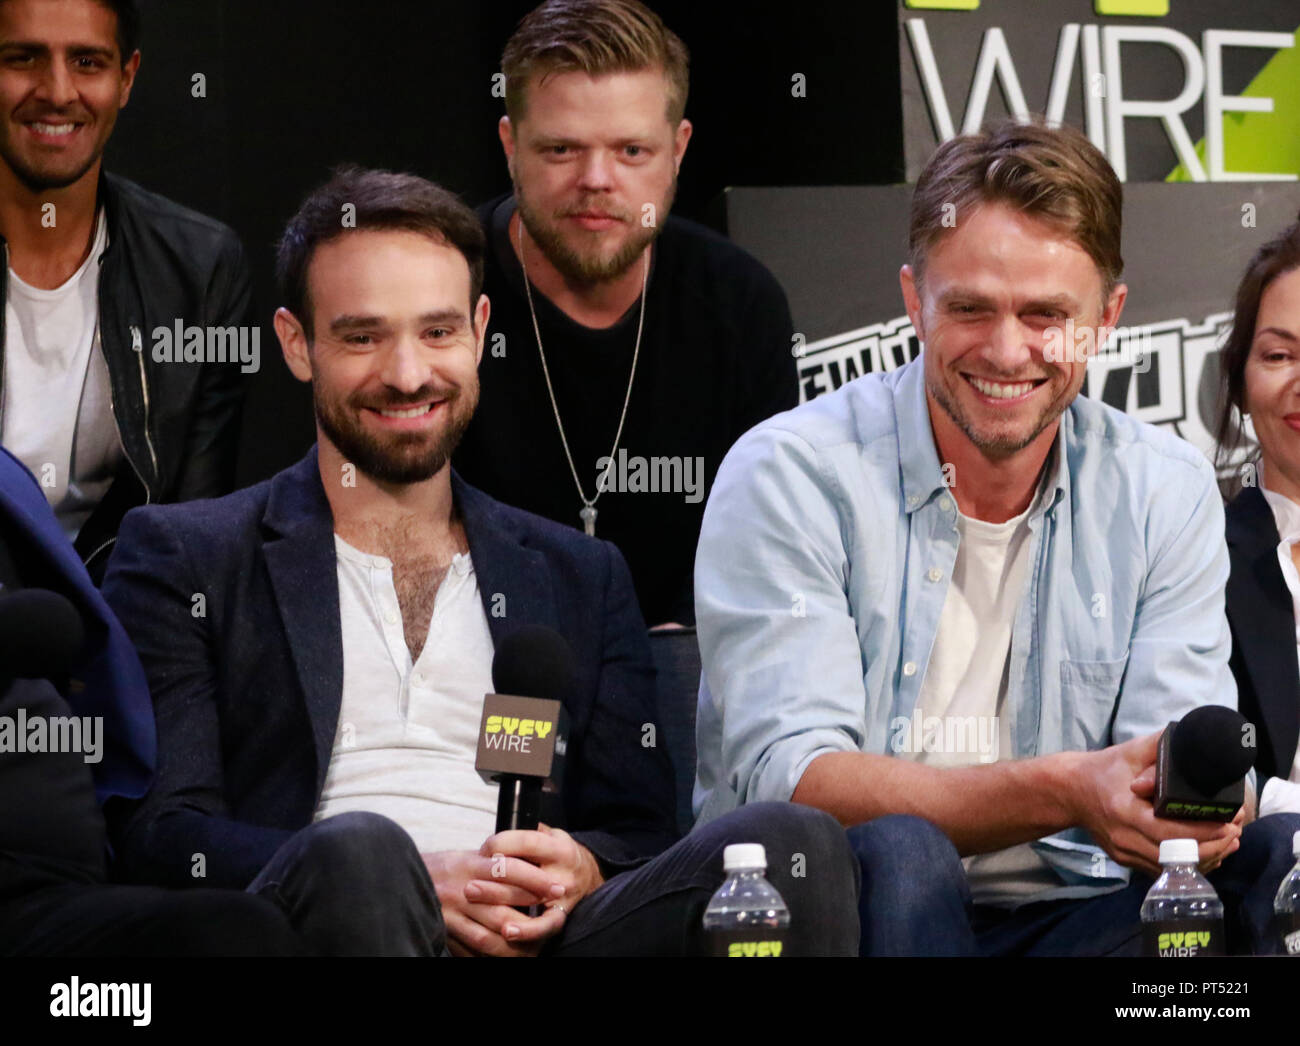 New York, NY, USA. 6th Oct, 2018. Charlie Cox and Wilson Bethel at Marvel's Daredevil Cast Interview during the 2018 New York Comic Con at the Jacob Davits Convention Center in New York City on October 6, 2018. Credit: Diego Corredor/Media Punch/Alamy Live News Stock Photo